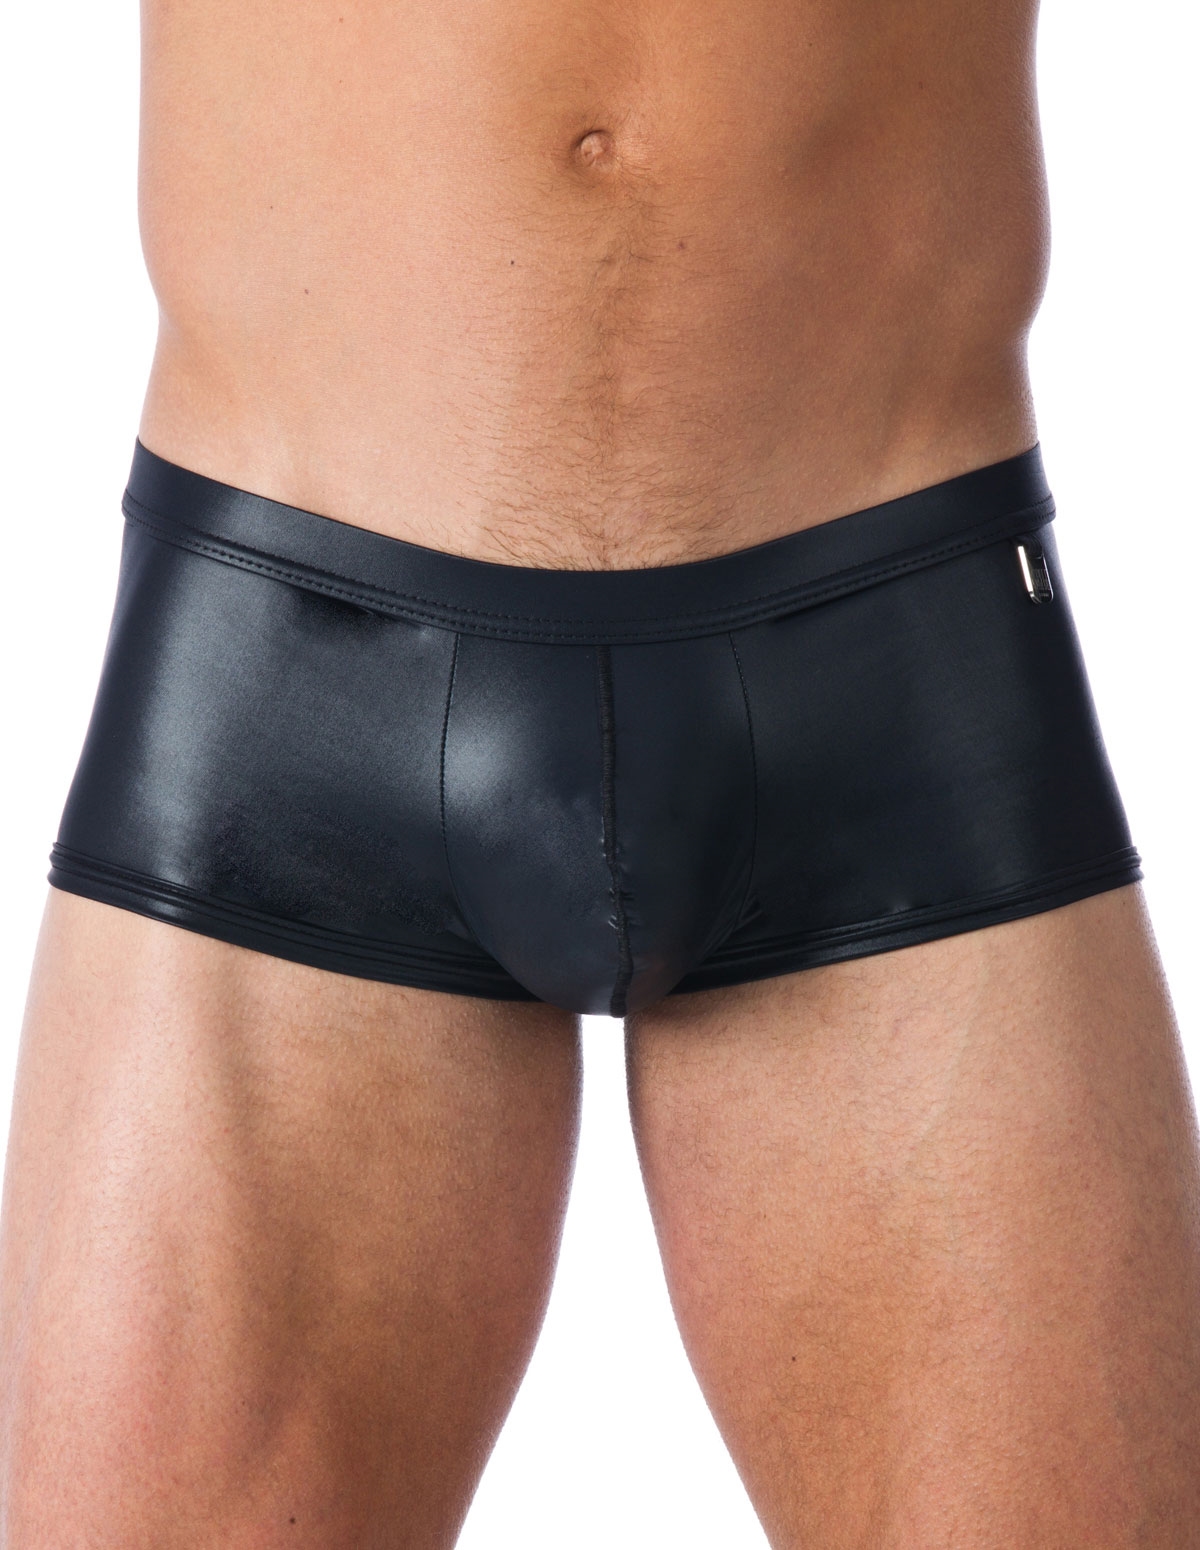 alternate image for Boytoy Square Cut Briefs